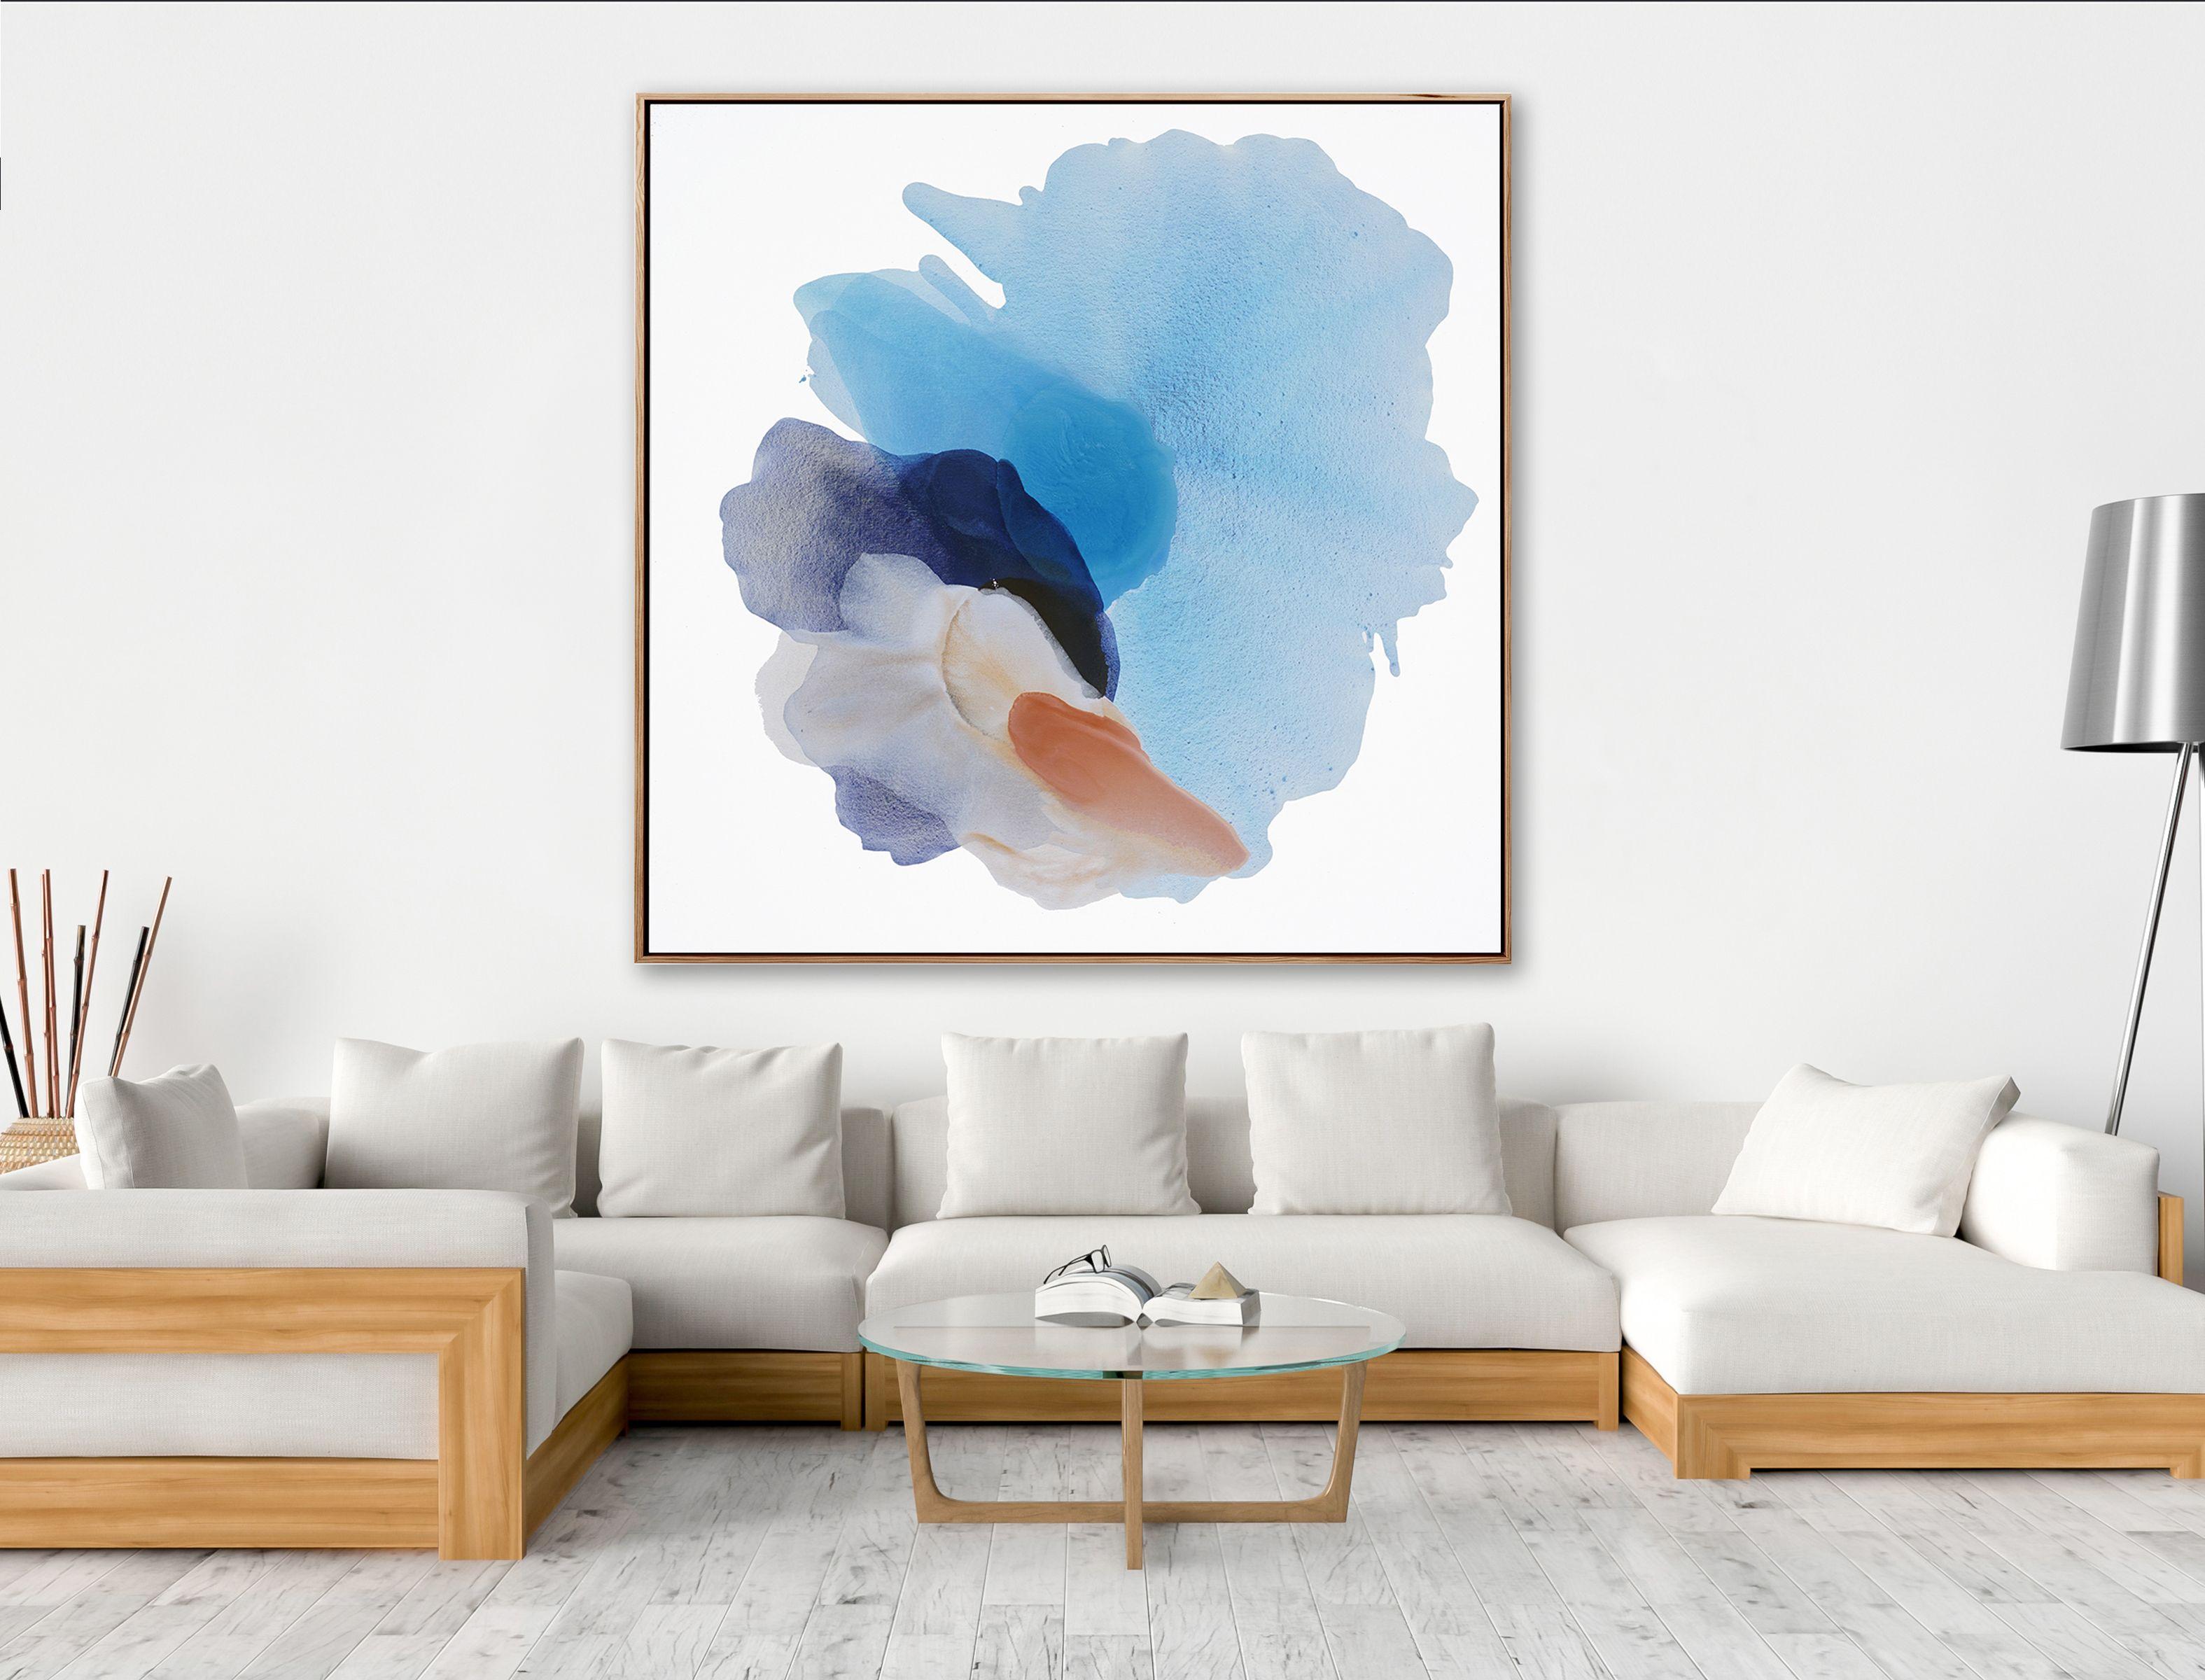 An original minimal abstract painting inspired by the movement of clouds at sunset. A beautiful, calming piece with delicate veils of color.  A serene but vibrant abstract.    My work is minimal yet expressive in style, bringing a sense of